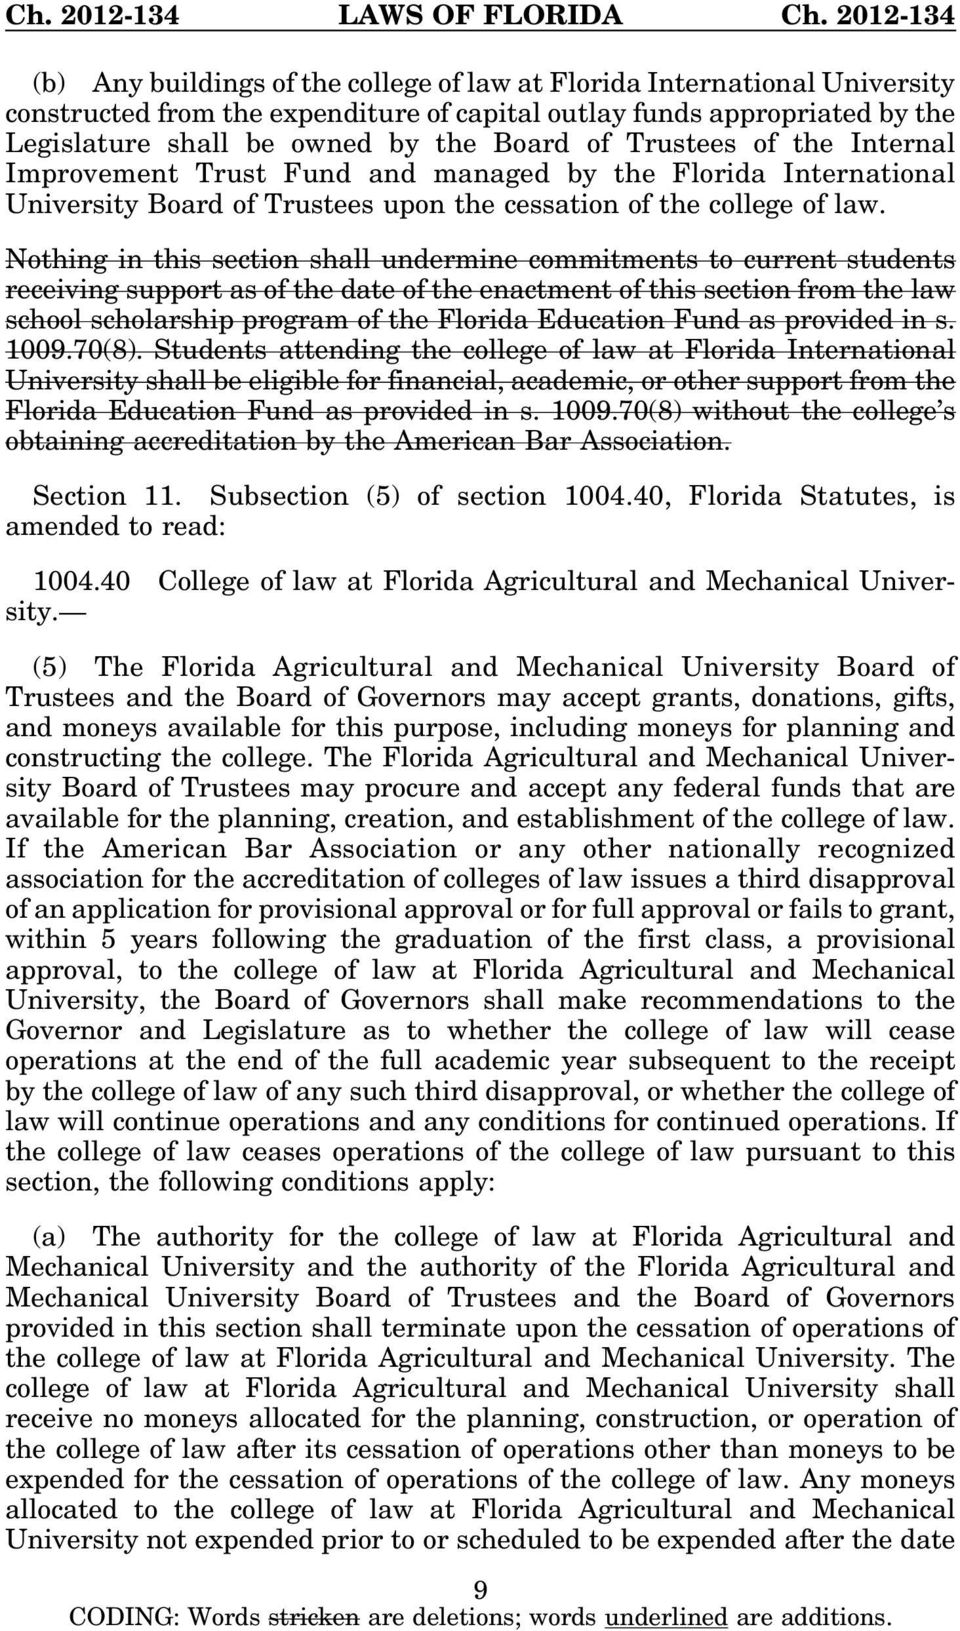 Nothing in this section shall undermine commitments to current students receiving support as of the date of the enactment of this section from the law school scholarship program of the Florida